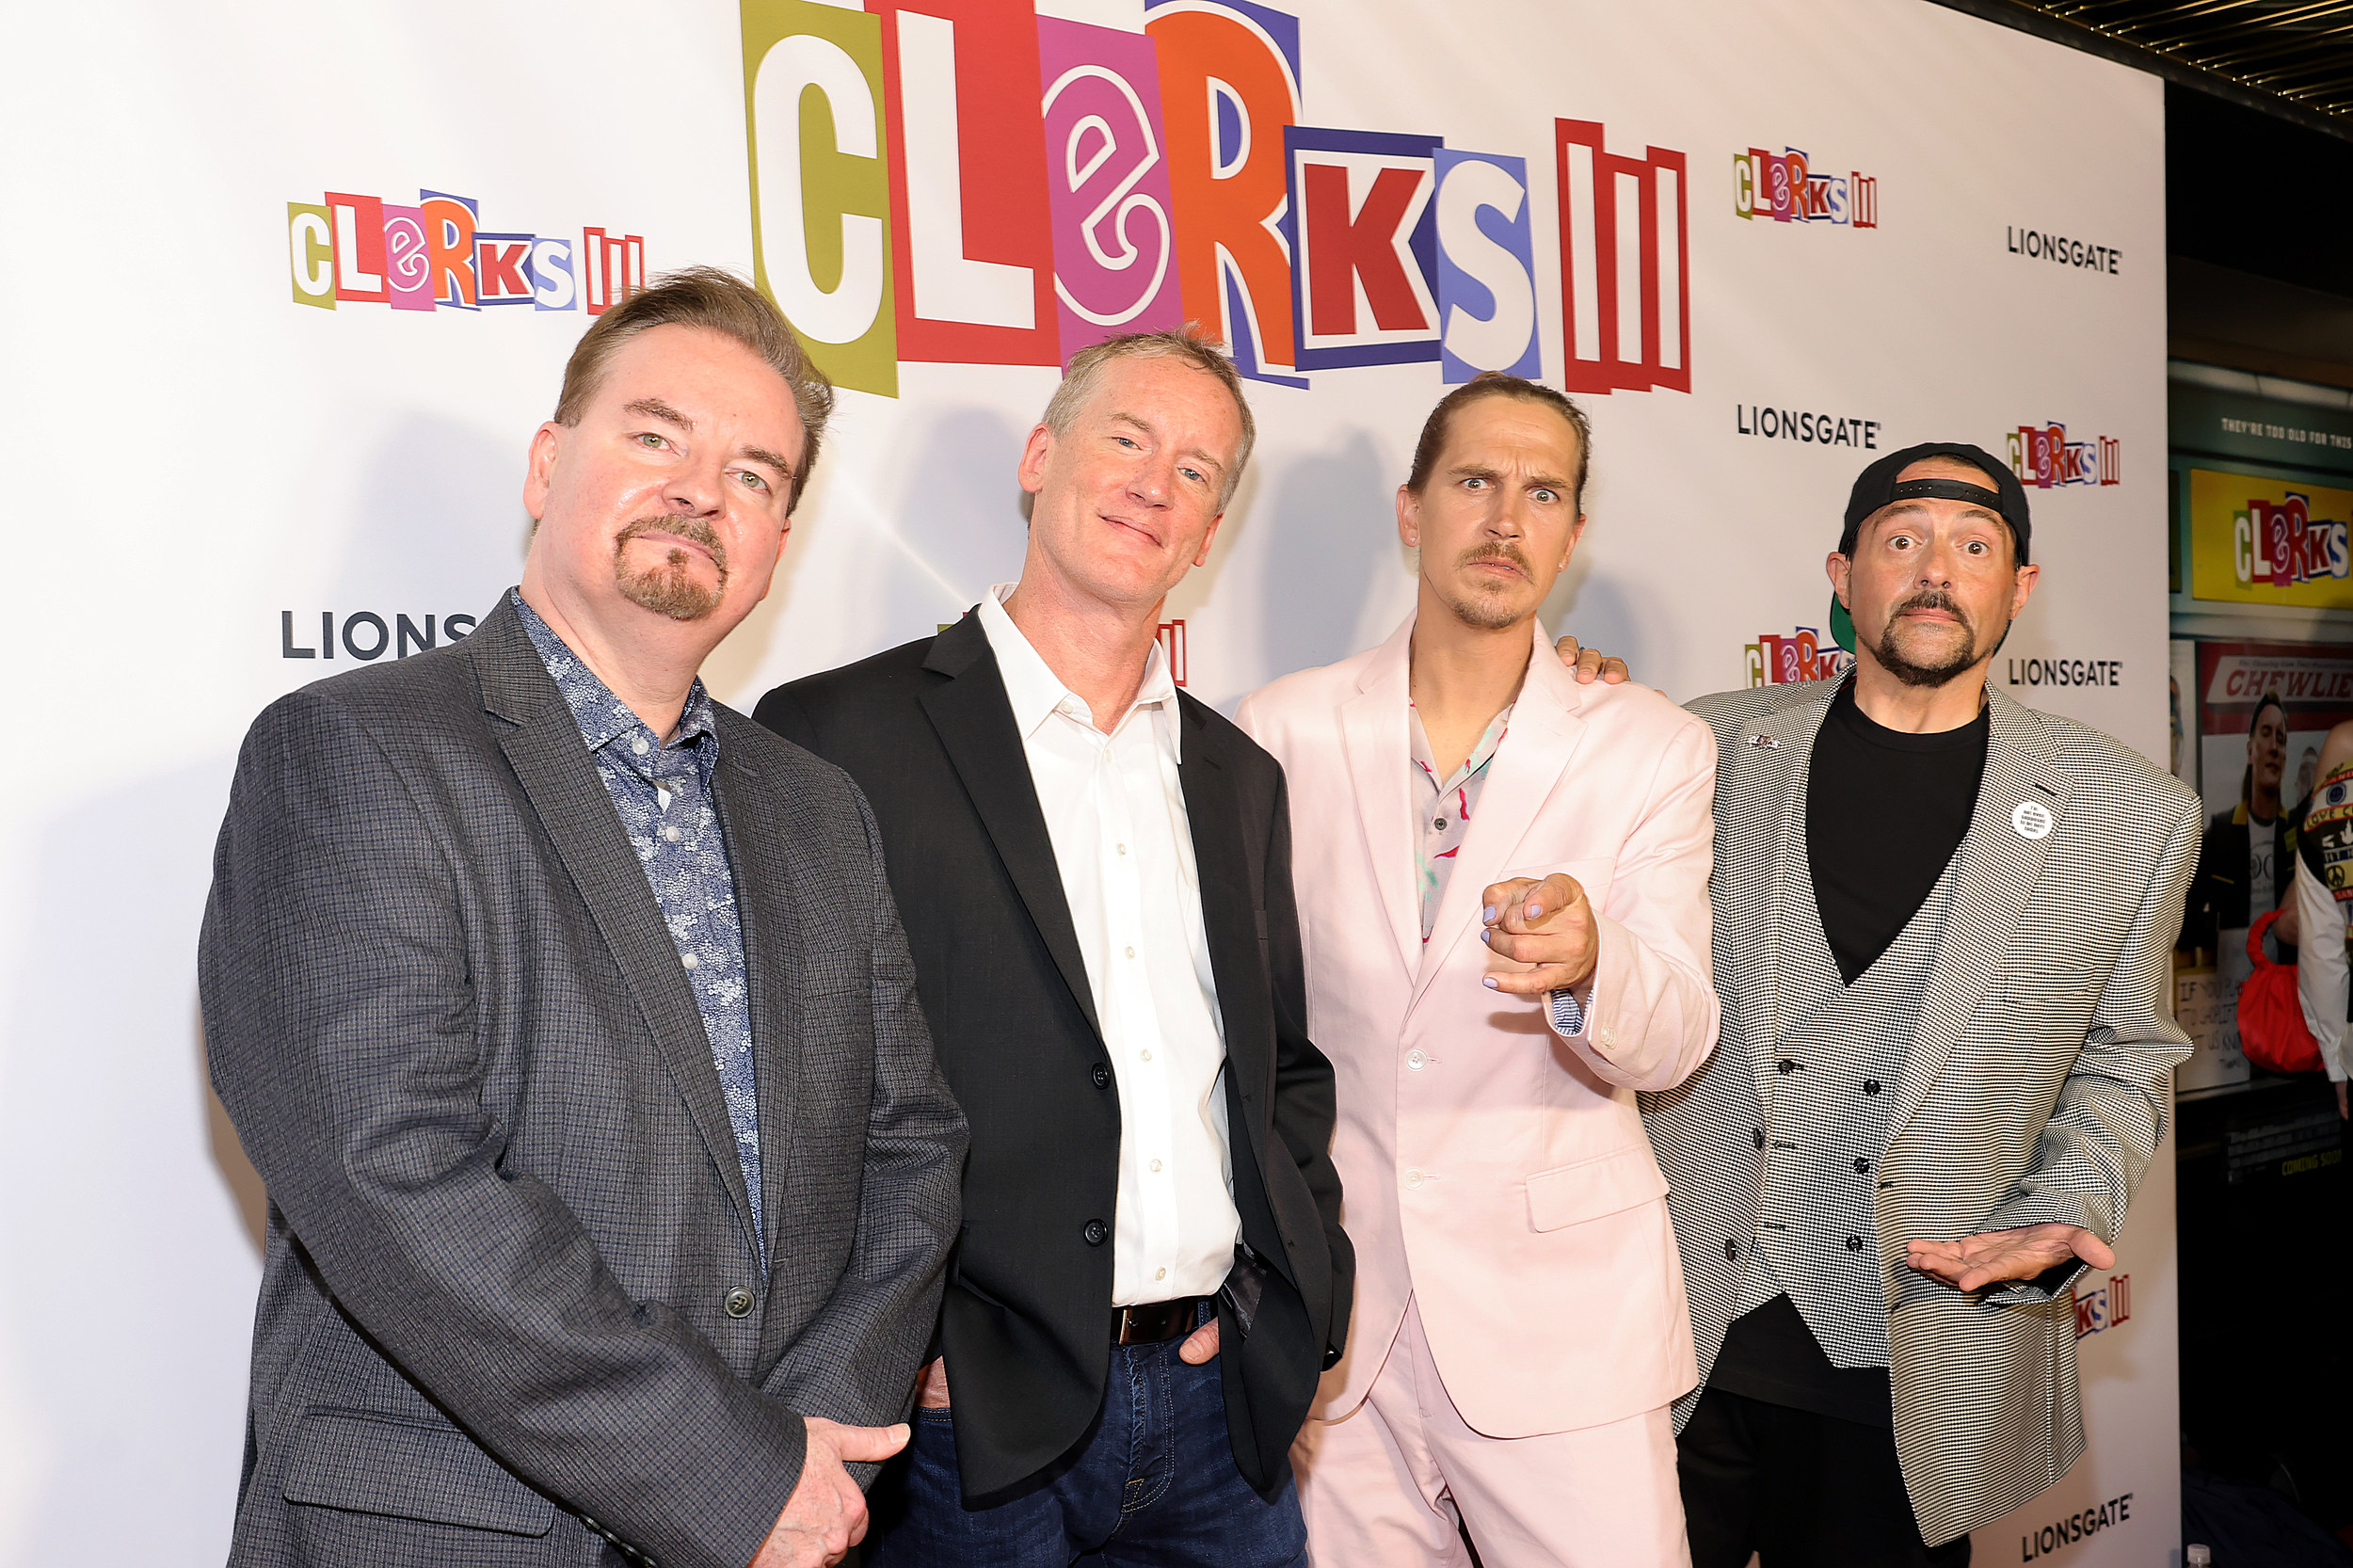 Los Angeles Premiere Of Lionsgate's "Clerks III" - Arrivals